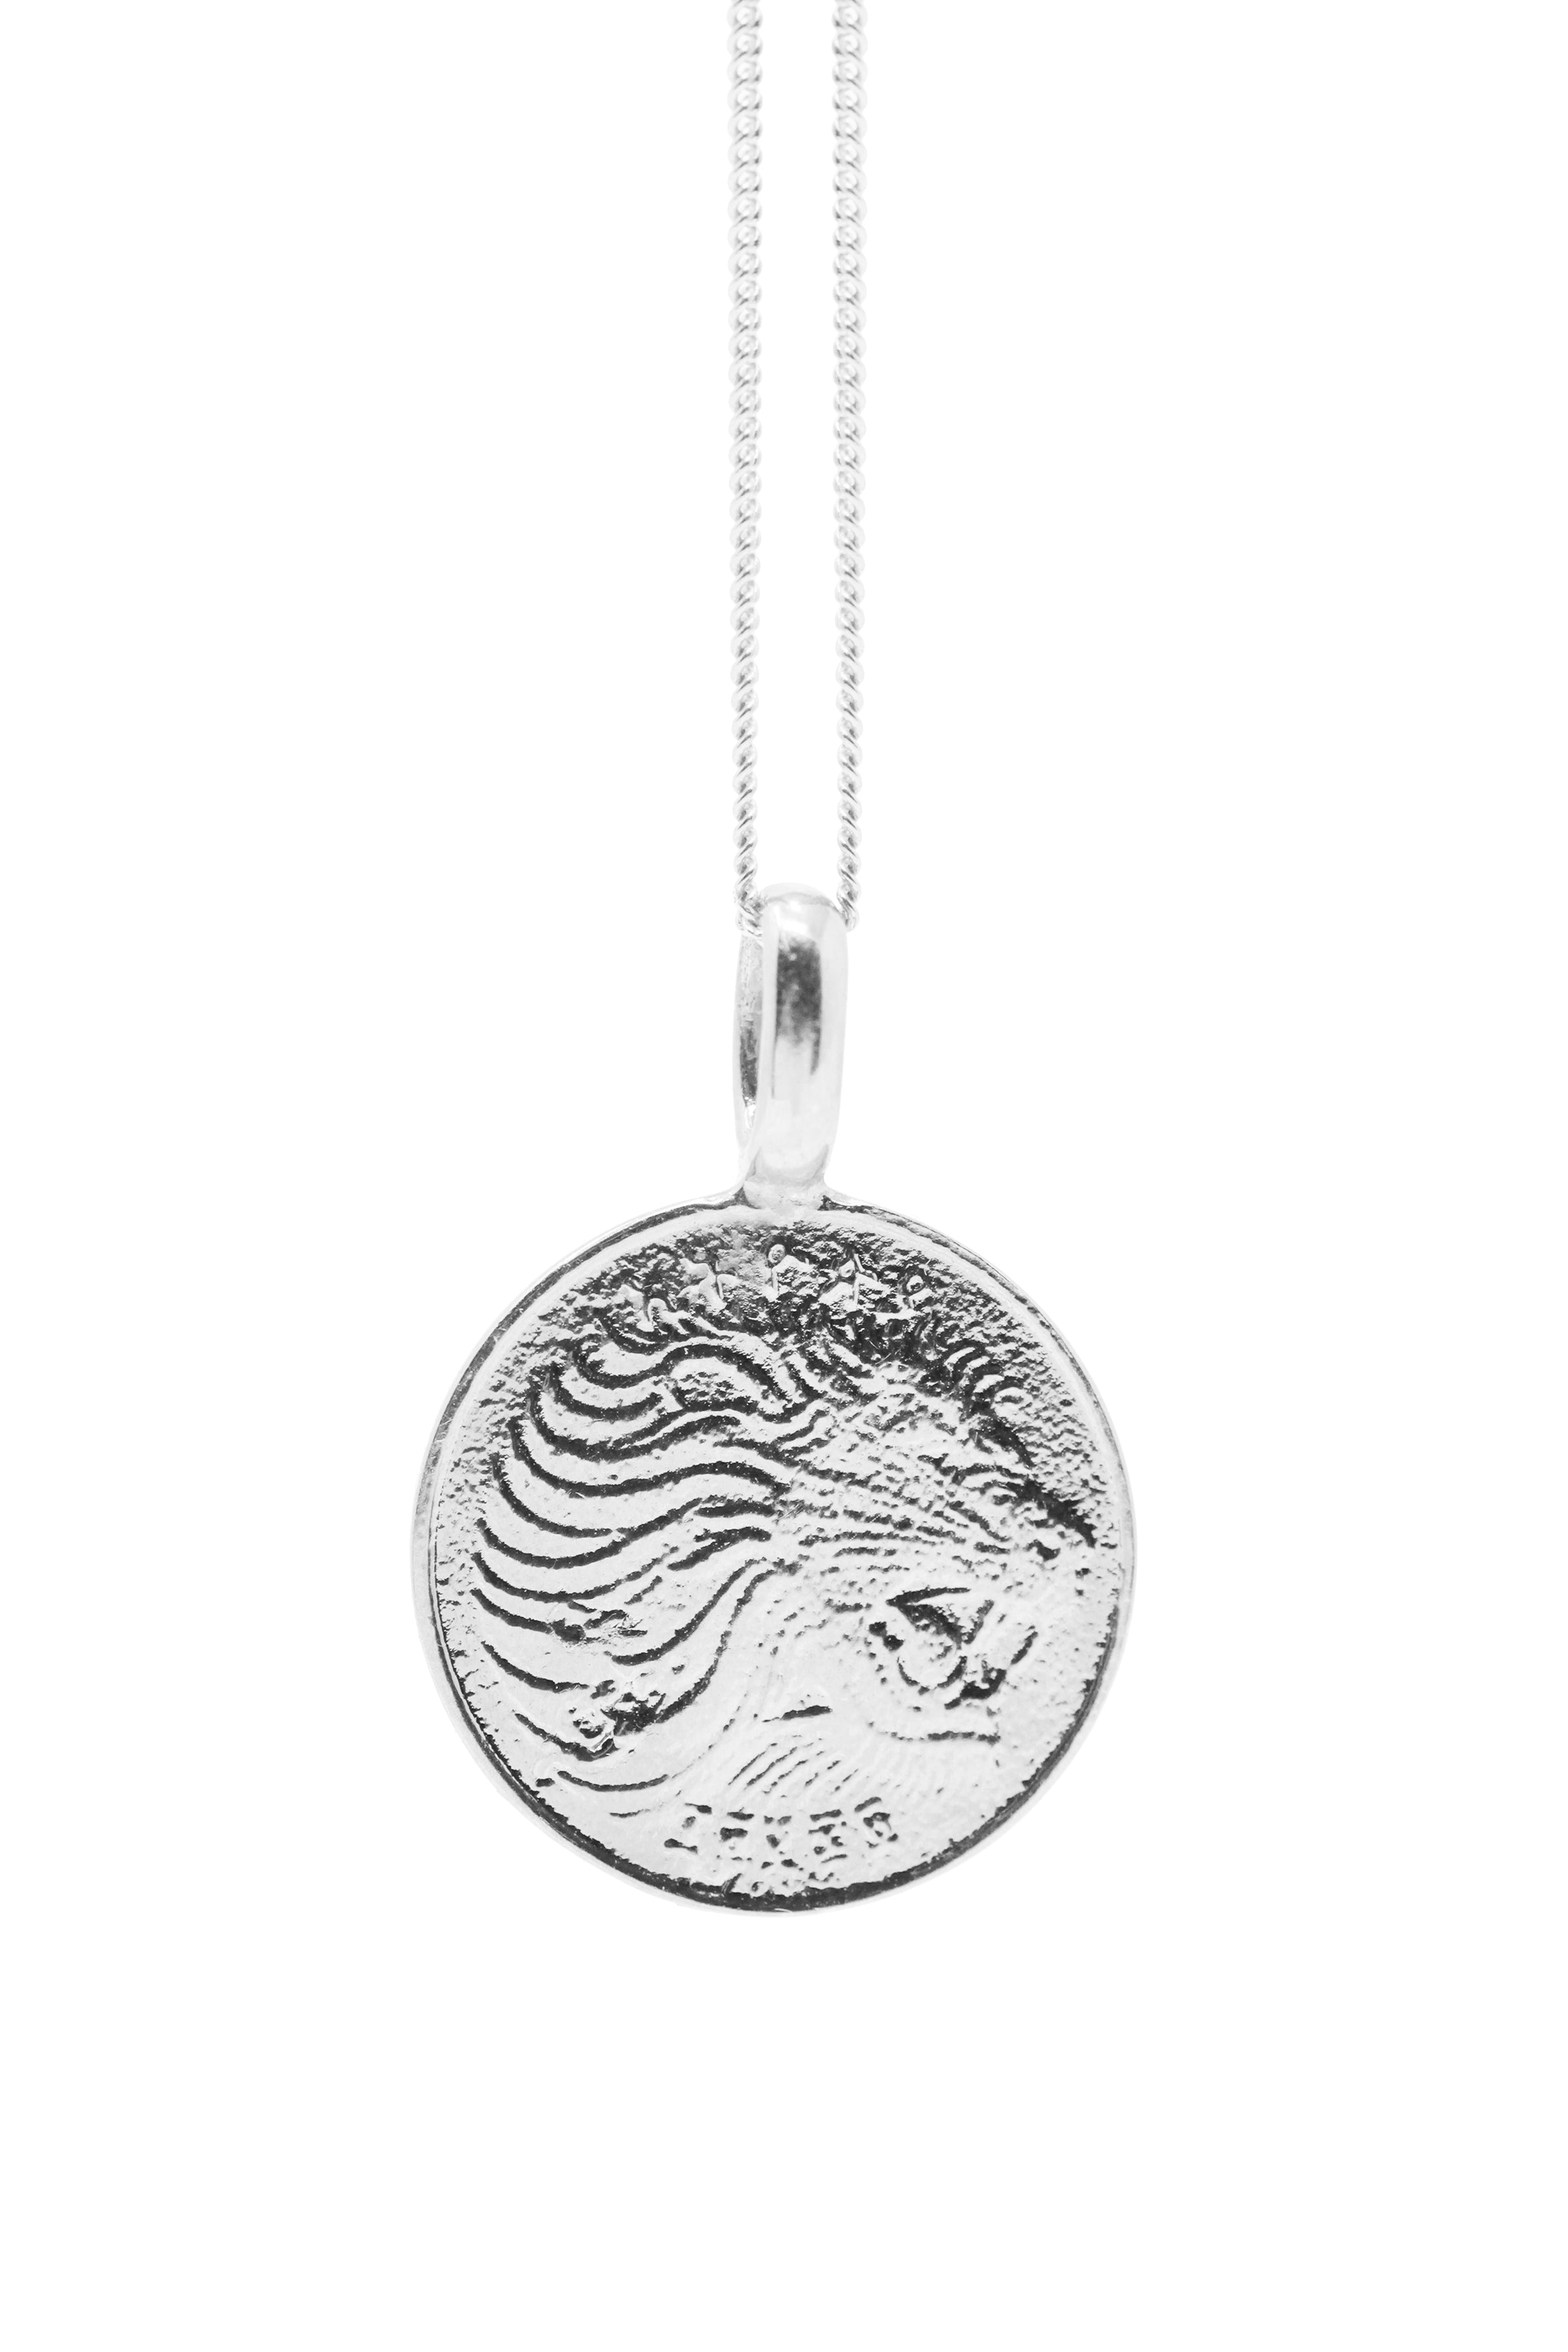 THE ETHIOPIA Lion Coin Necklace – omiwoods